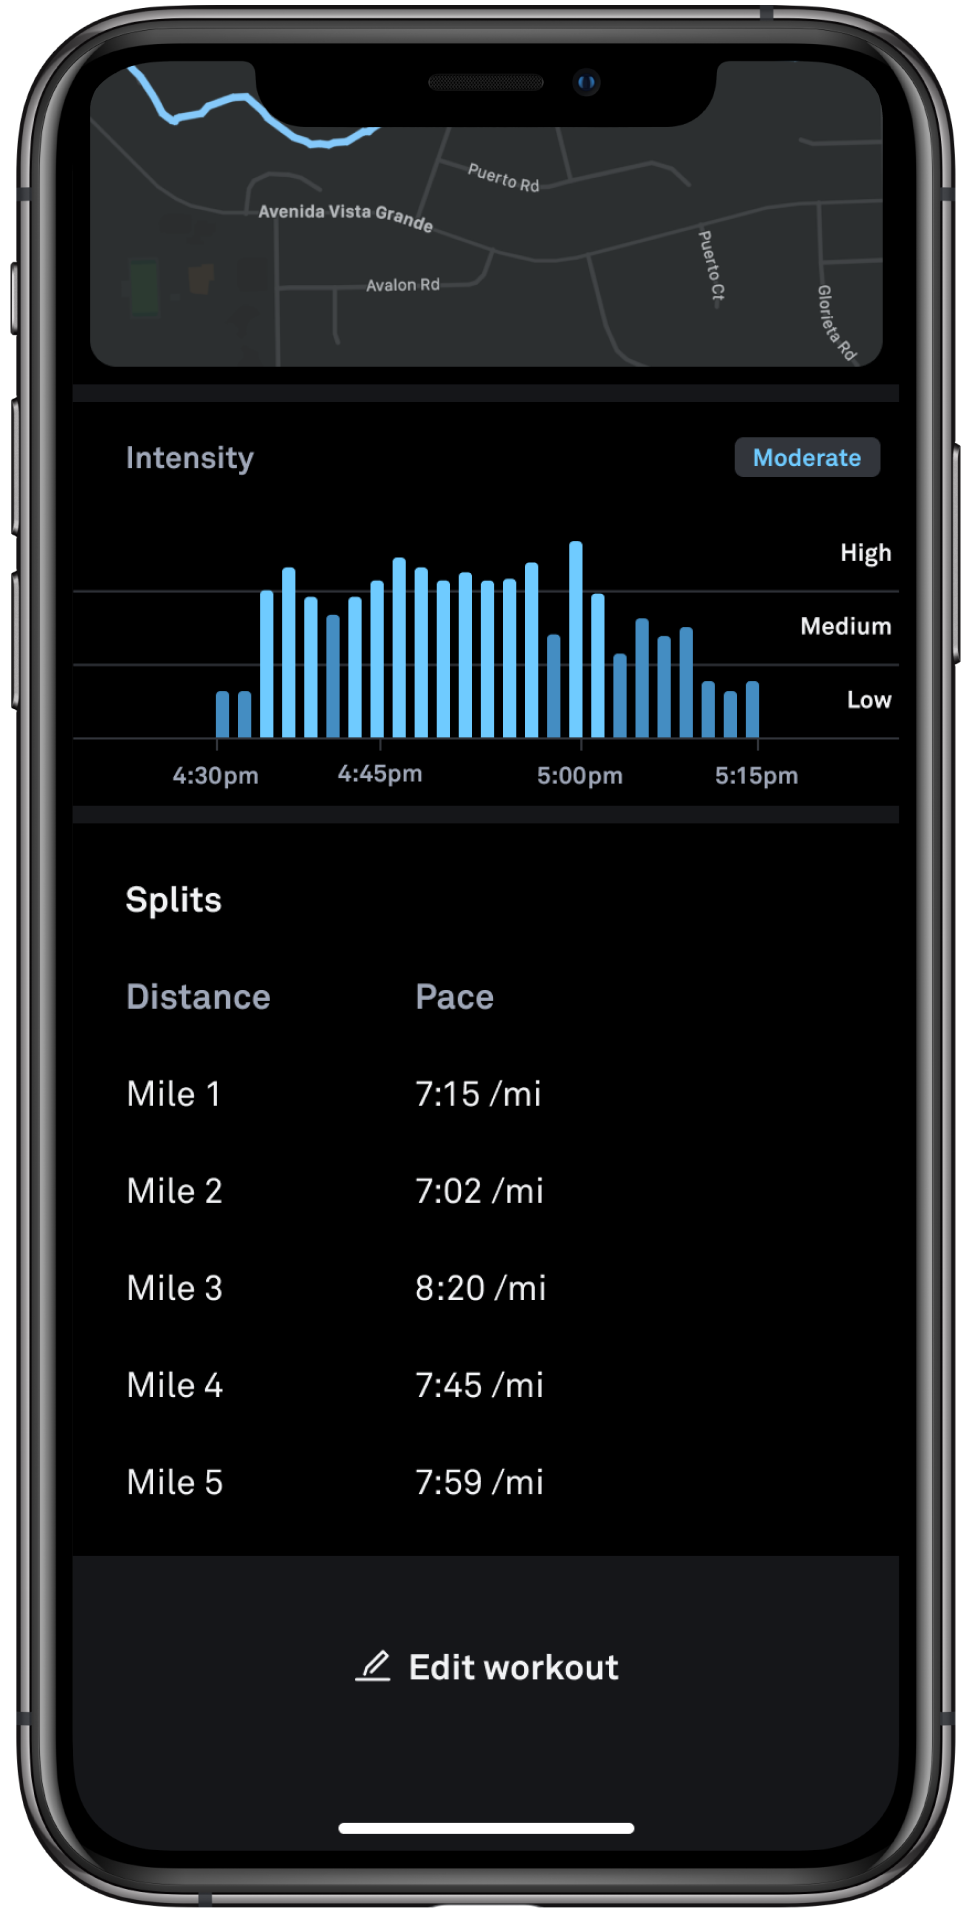 a picture of a phone. the phone's screen displays a bar graph of workout intensity over time, and a list of lap split times. at the bottom of the screen is an option to edit workout